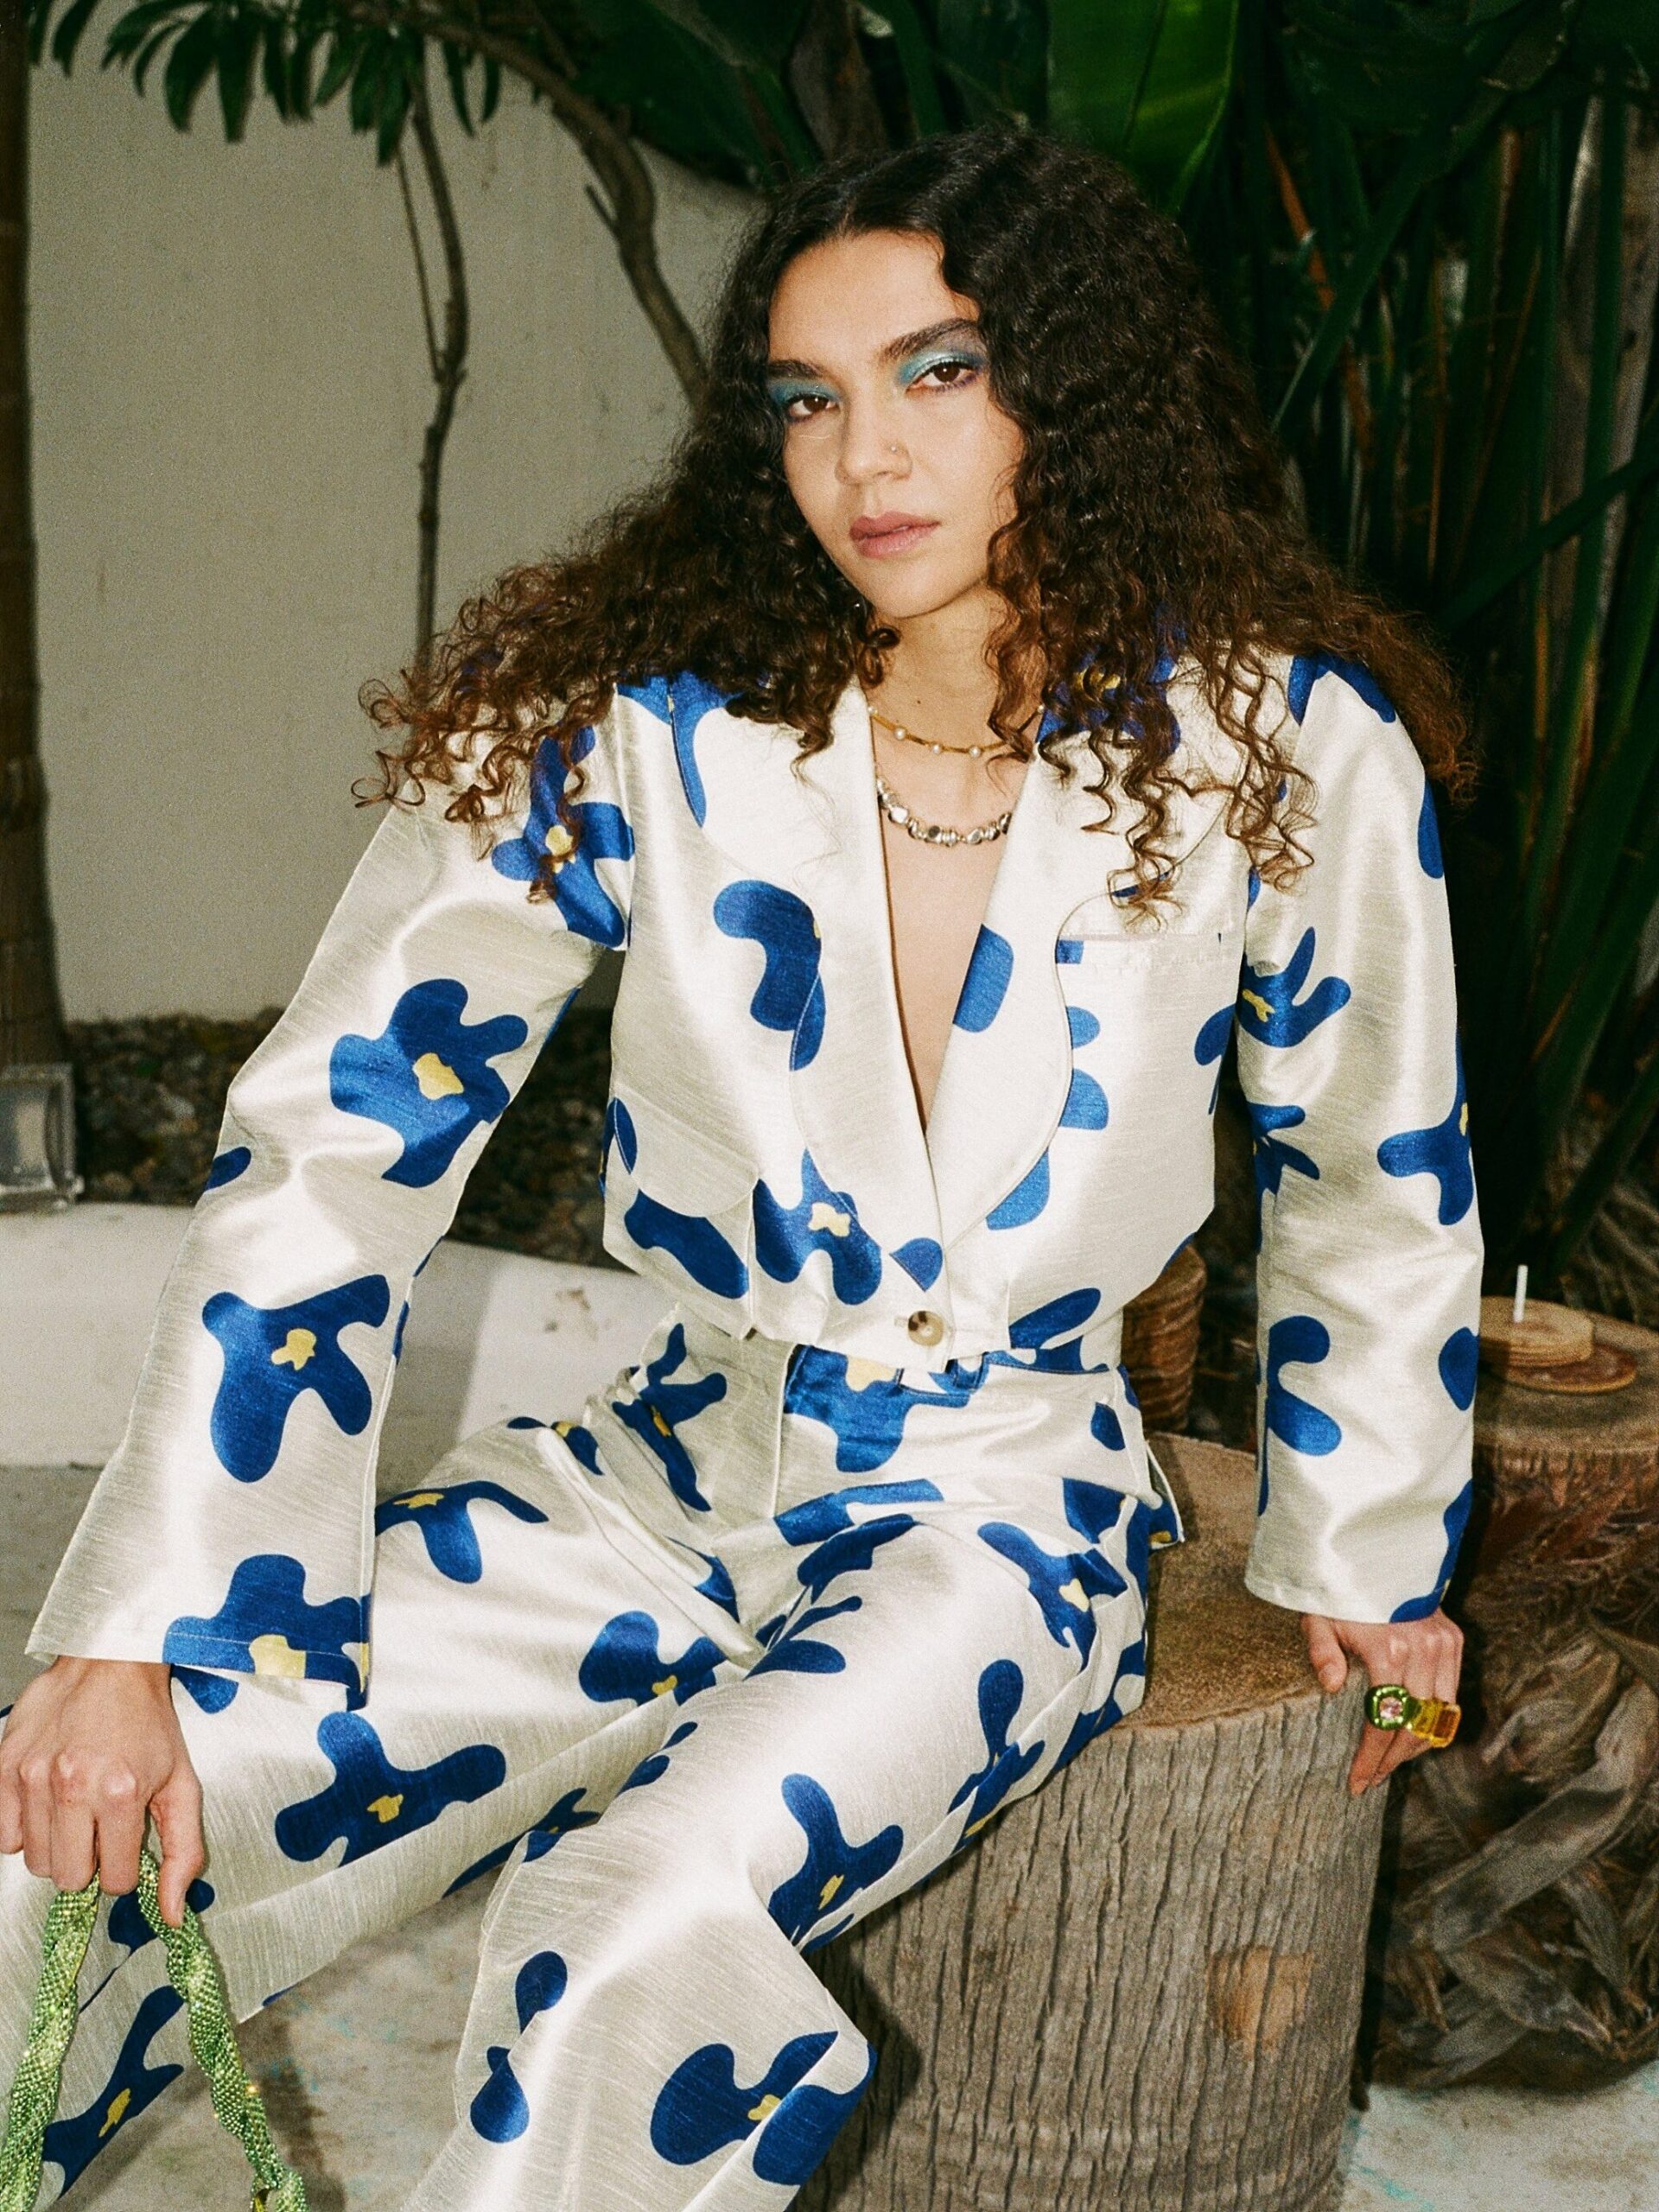 A model, seated wearing Selva Negra's matching coco jacket and migo pants in white with blue flowers.